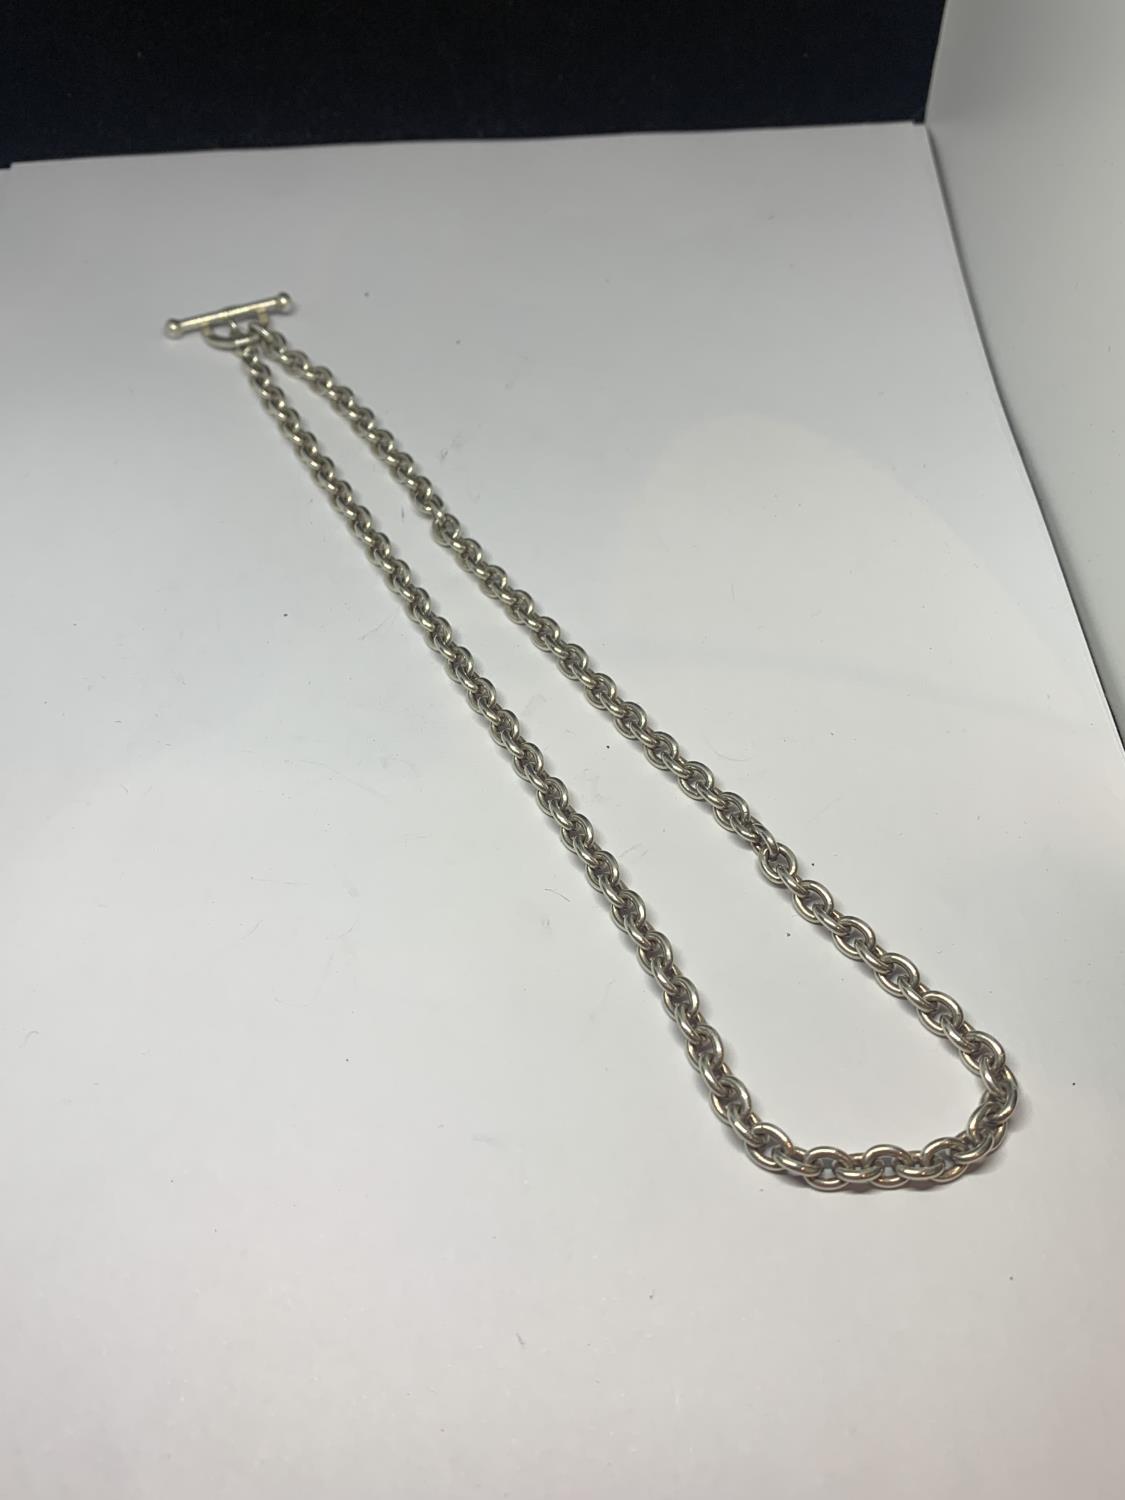 A MARKED SILVER BELCHER LINK NECKLACE WITH T BAR FASTEN LENGTH 46CM